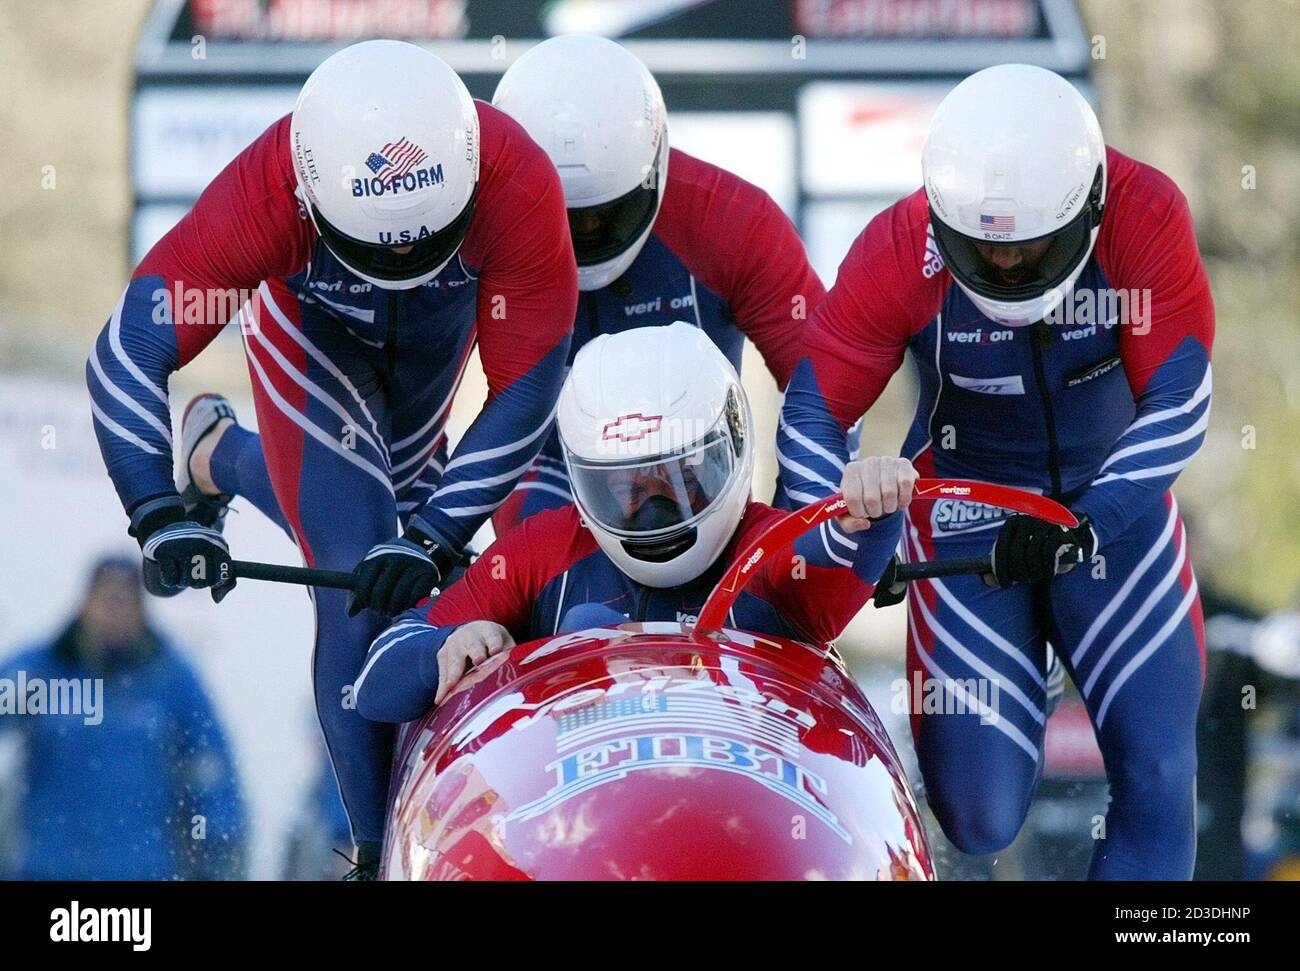 ATTENTION EDITORS CORRECTED CAPTION U.S. bob pilot Todd Hays (front) and  his teammates Randy Jones, Paul Jovanovic and Garrett Hines enter the track  at a four man bobsleigh World Cup race in